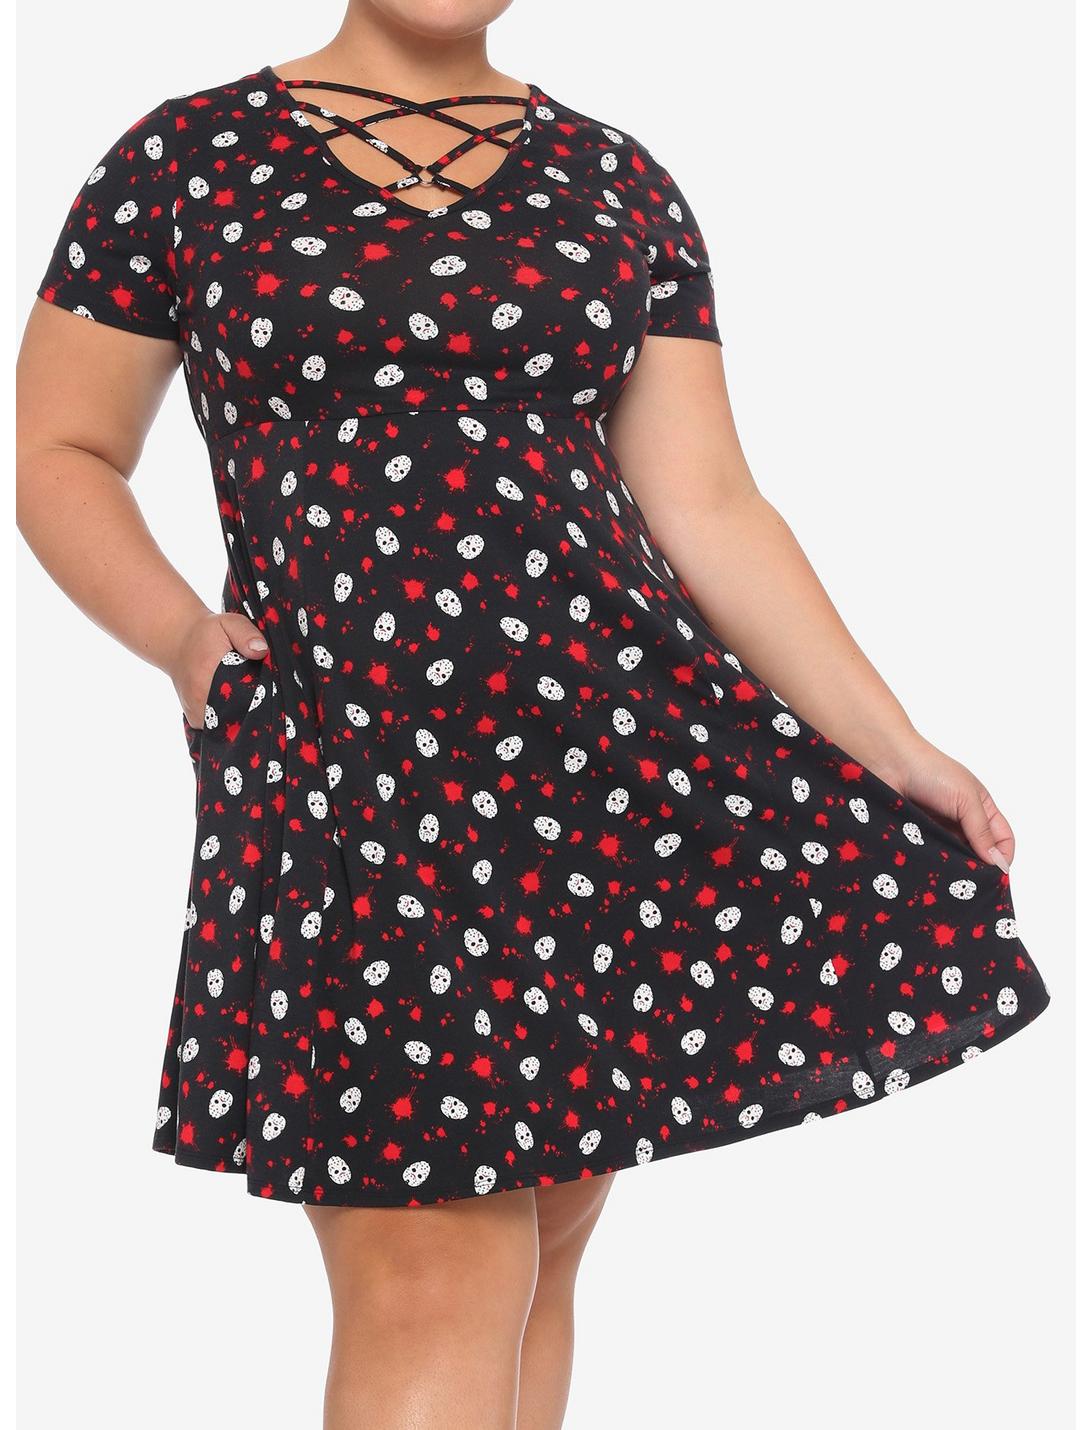 Friday The 13th Strappy Dress Plus Size, MULTI, hi-res